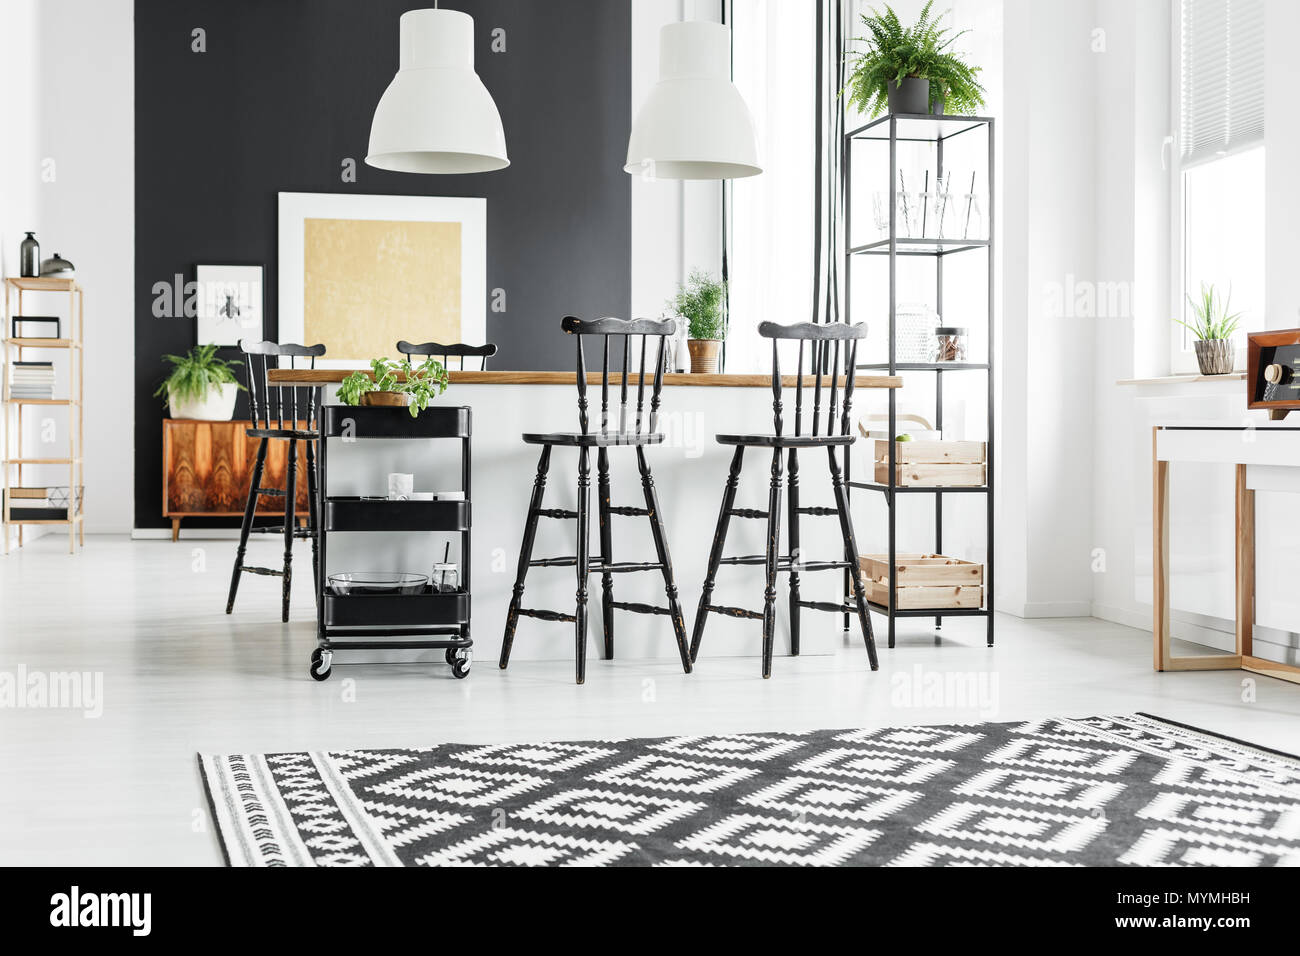 Black and white geometric carpet in rustic kitchen with bar stools at wooden countertop Stock Photo